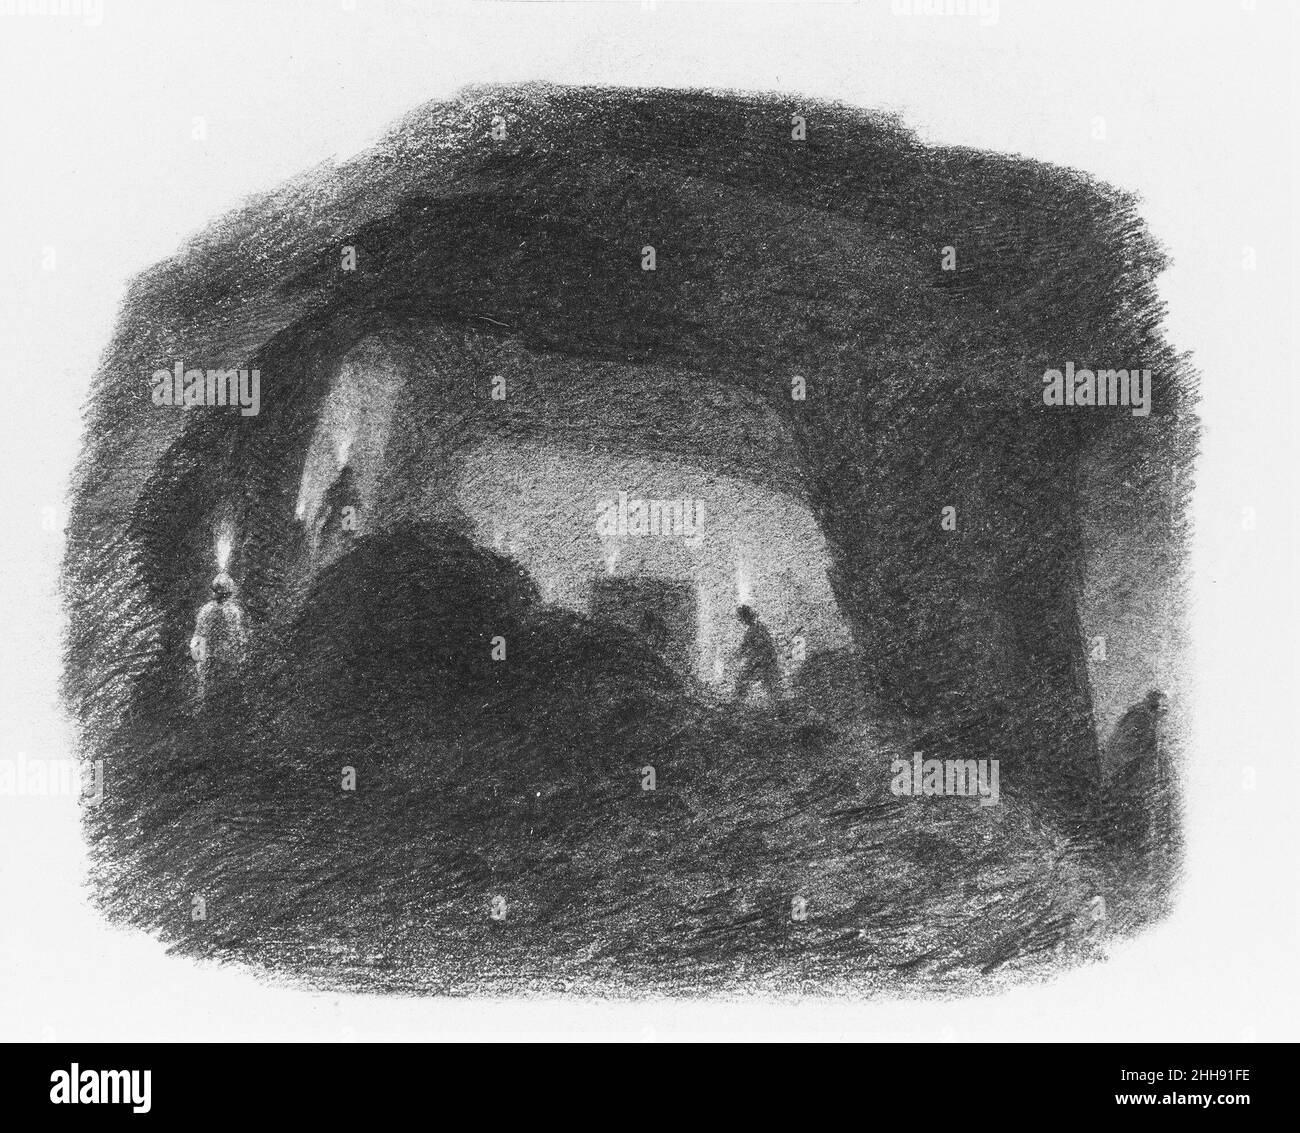 In the Valley of Wyoming, Pennsylvania (Interior of a Coal Mine, Susquehanna) 1852 Thomas Addison Richards This is one of two drawings (see also 1974.197.3) Richards executed as designs for wood-engraved illustrations to accompany an article he wrote for “Harper’s New Monthly Magazine,” published in October 1853. Like John Hazelhurst Latrobe, who had visited the area earlier, Richards made scenic views of the Susquehanna River region, but here he depicted mining activity in the coal-rich Wyoming Valley of the Susquehanna. The glowing lights in the two drawings are probably candles affixed to t Stock Photo